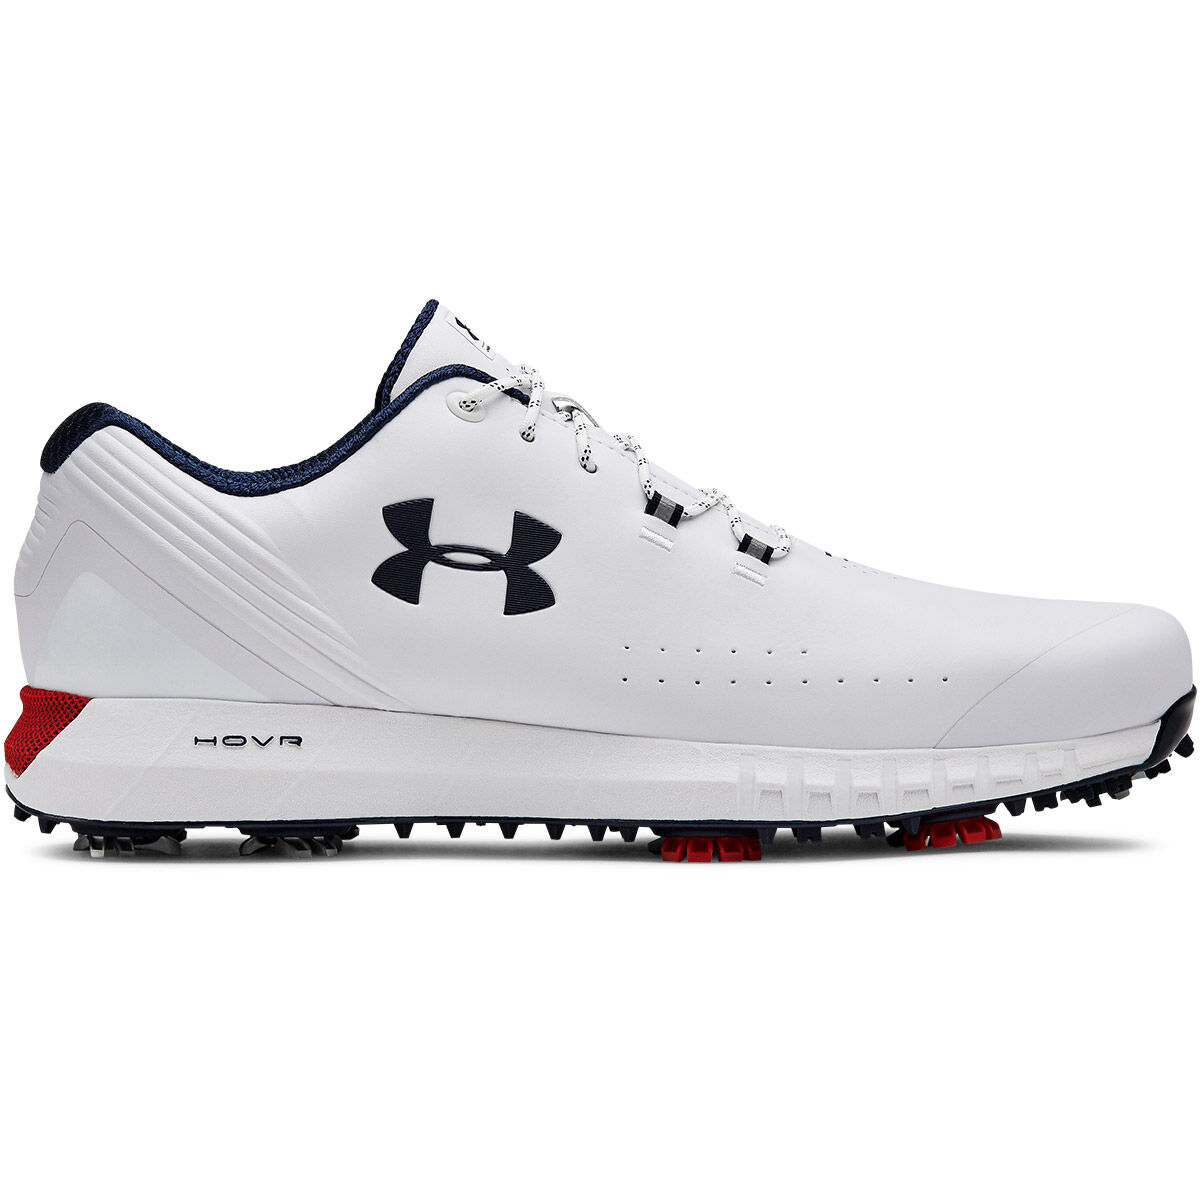 Under Armour HOVR Drive Shoes from 